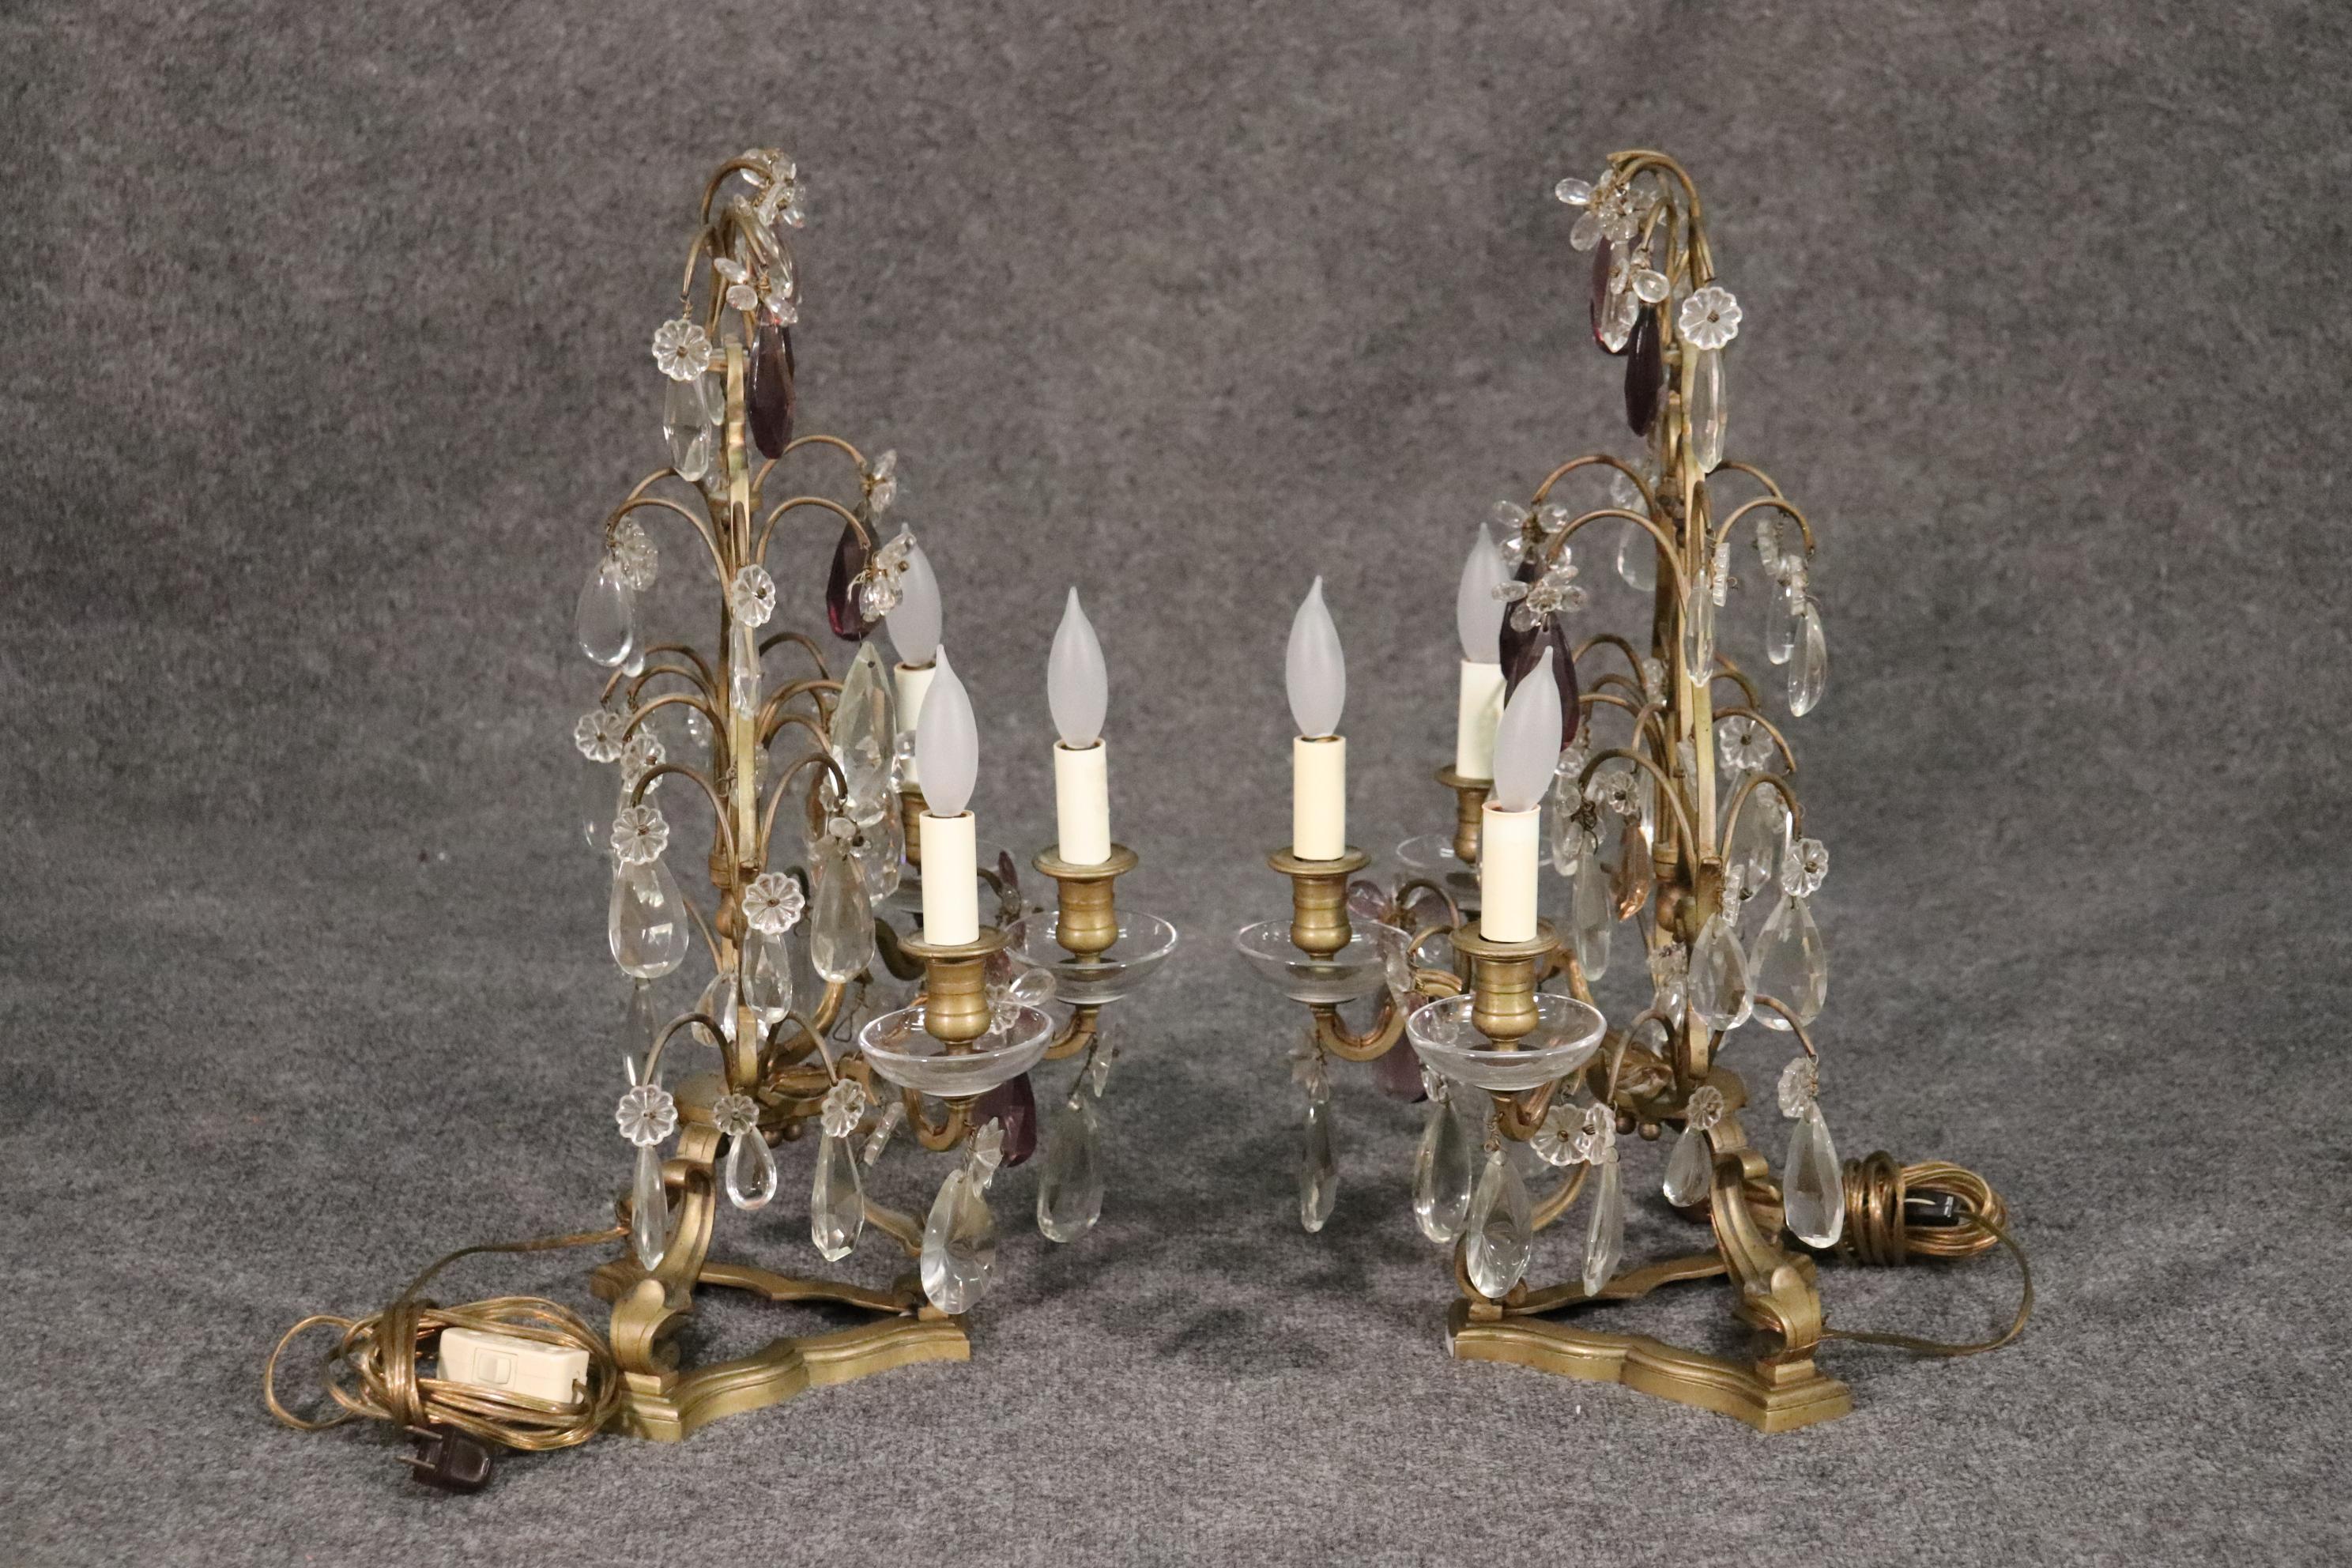 This is a fine pair of vintage 1940s French tabletop candelabrum, circa 1940. They are fitted with fine clear crystals and amythest colored crystals. Measures 22 tall x 14 wide x 9 deep.